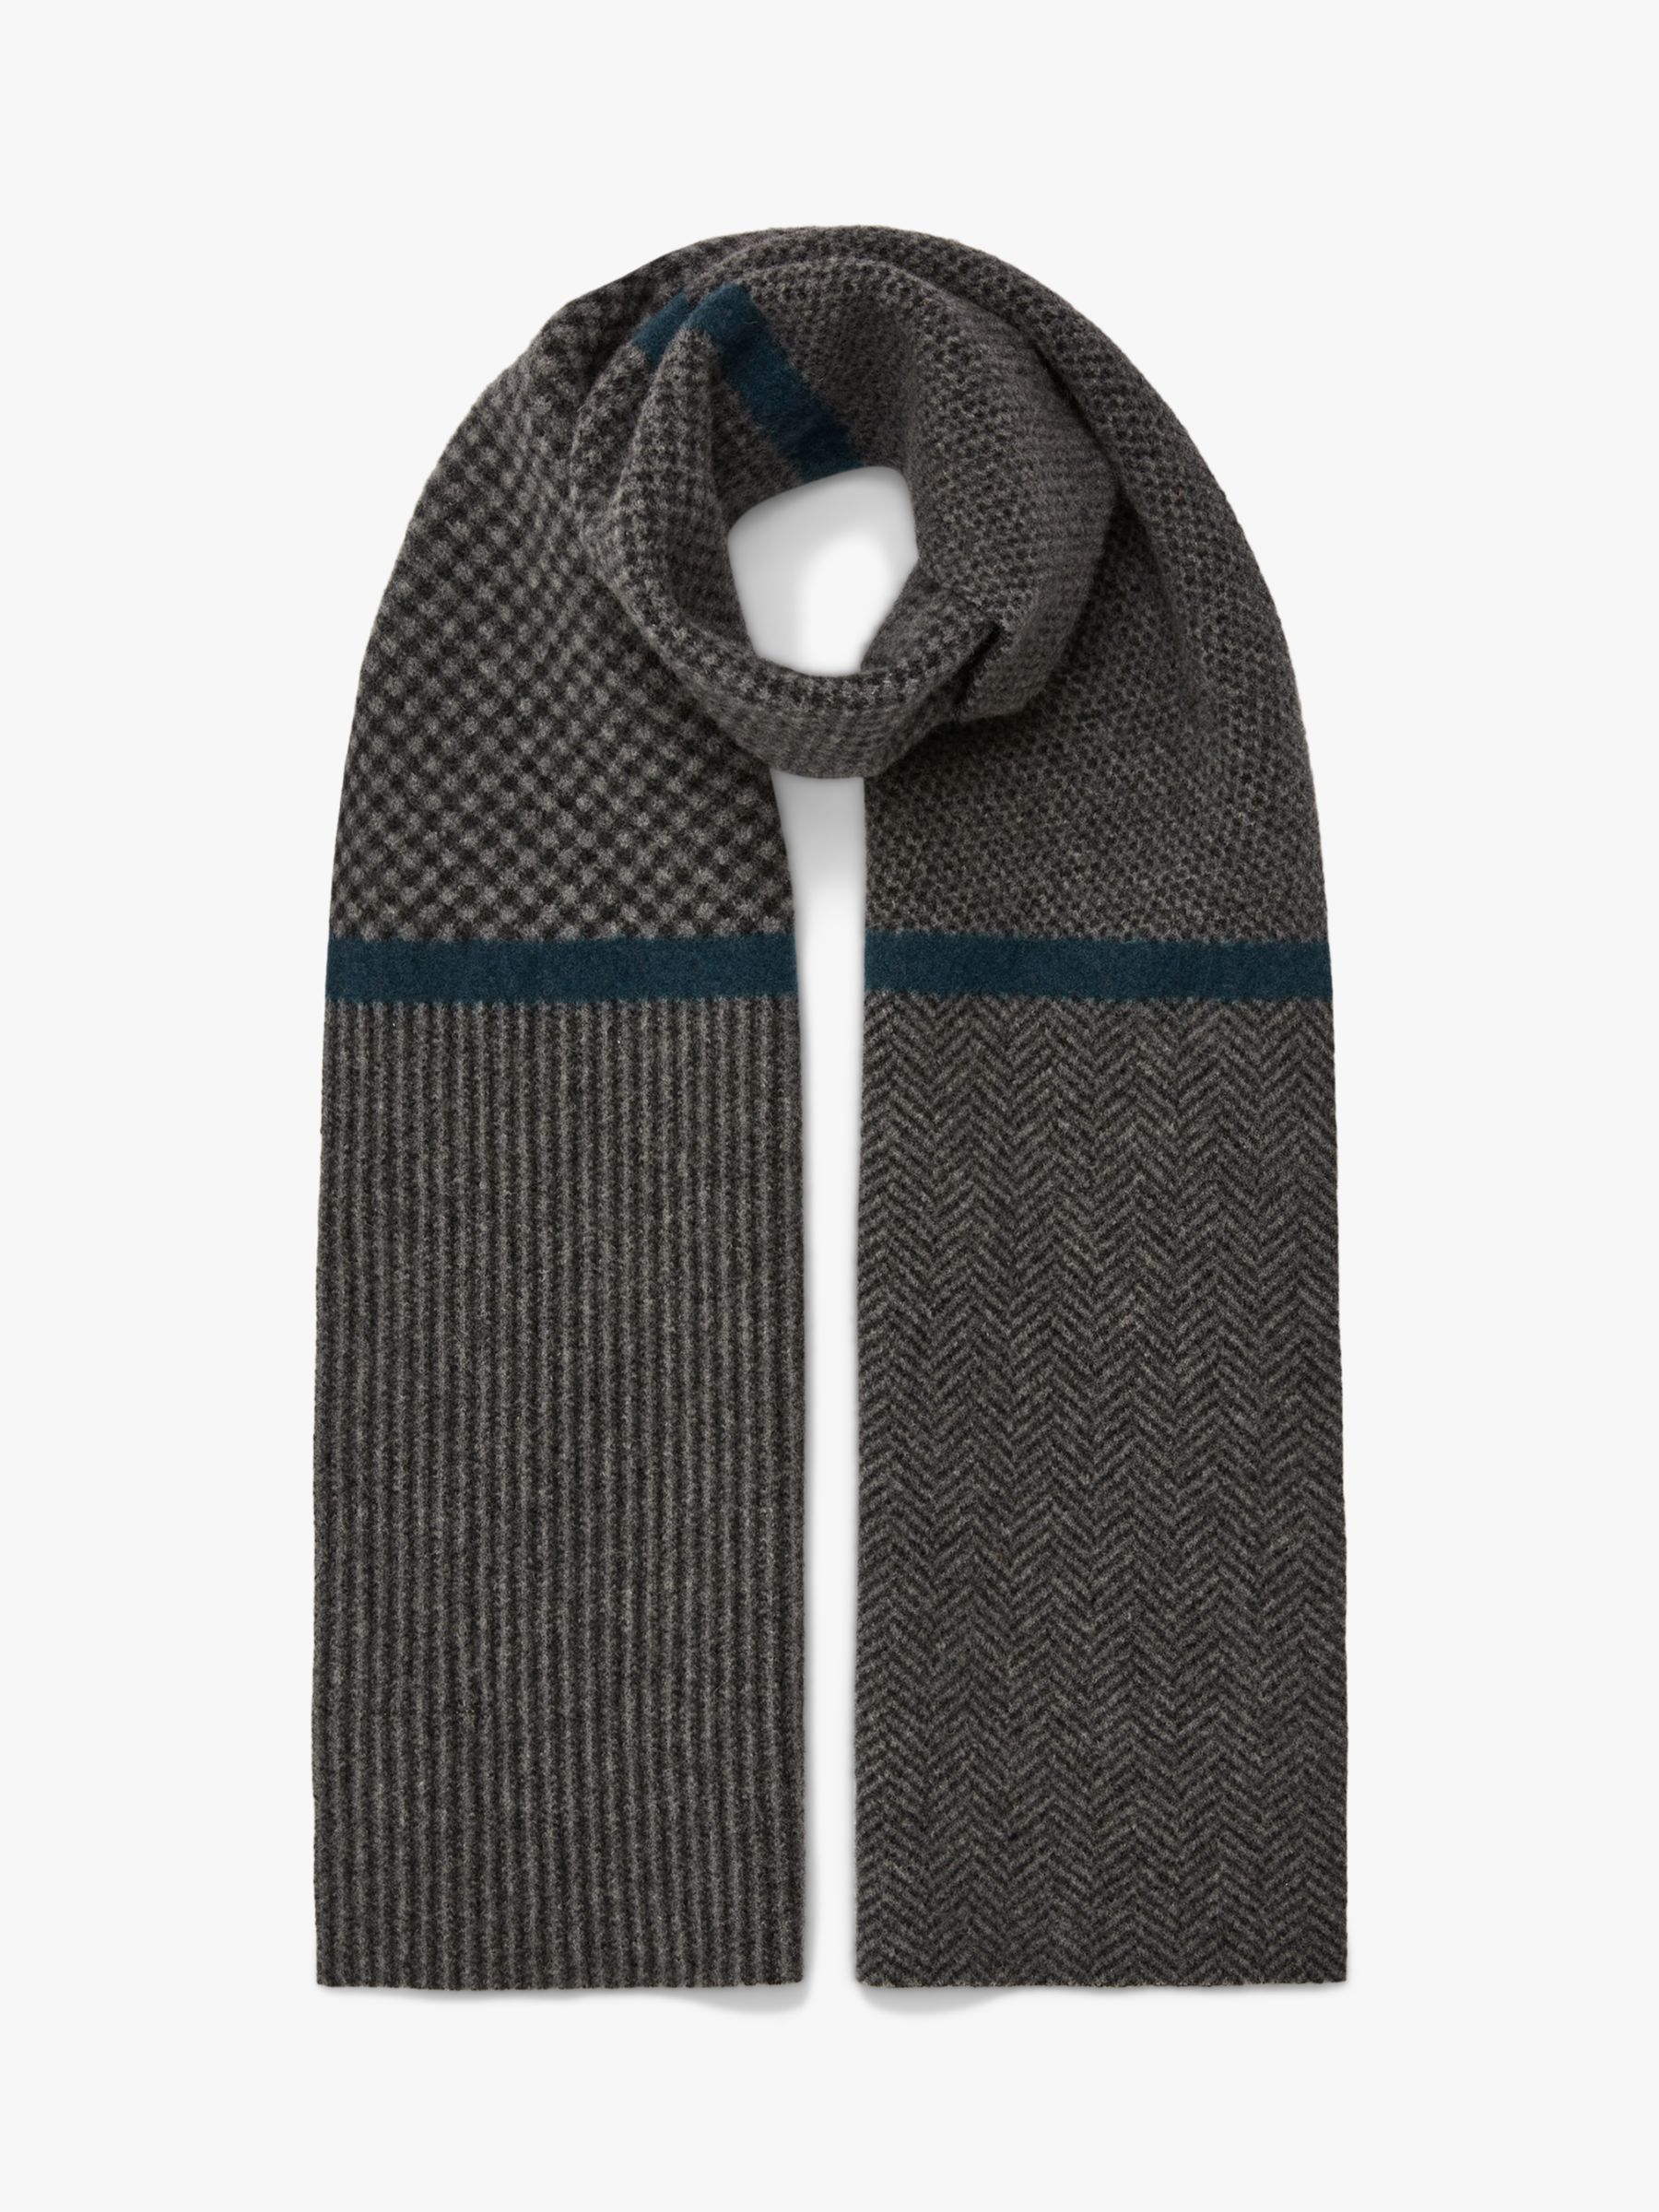 Buy Celtic & Co. Lambswool Chevron Scarf Online at johnlewis.com